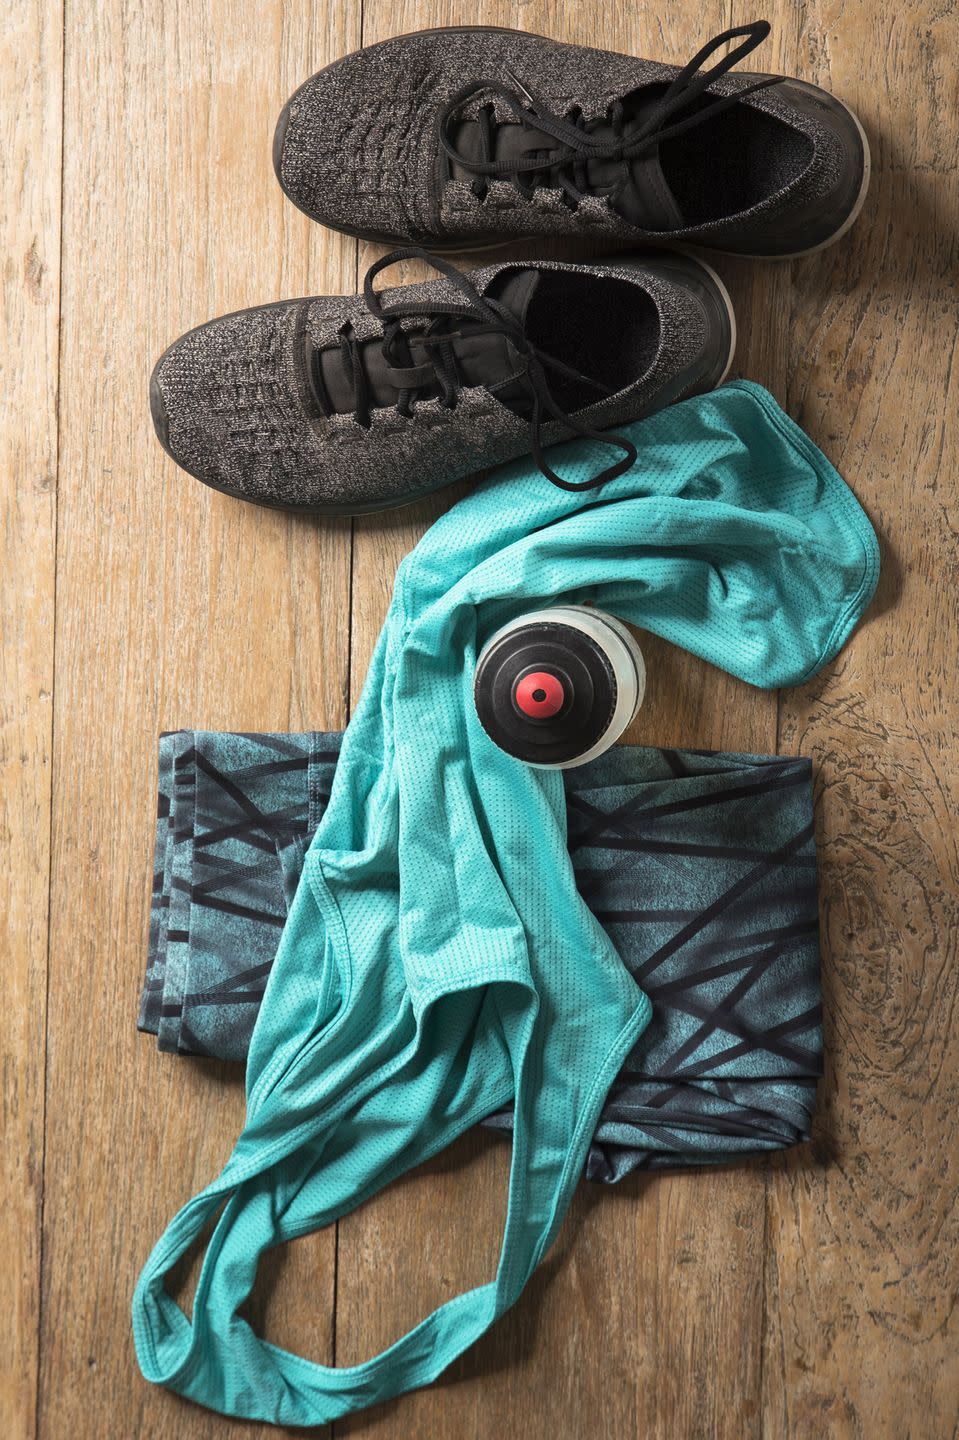 Wear workout gear that makes you feel good.